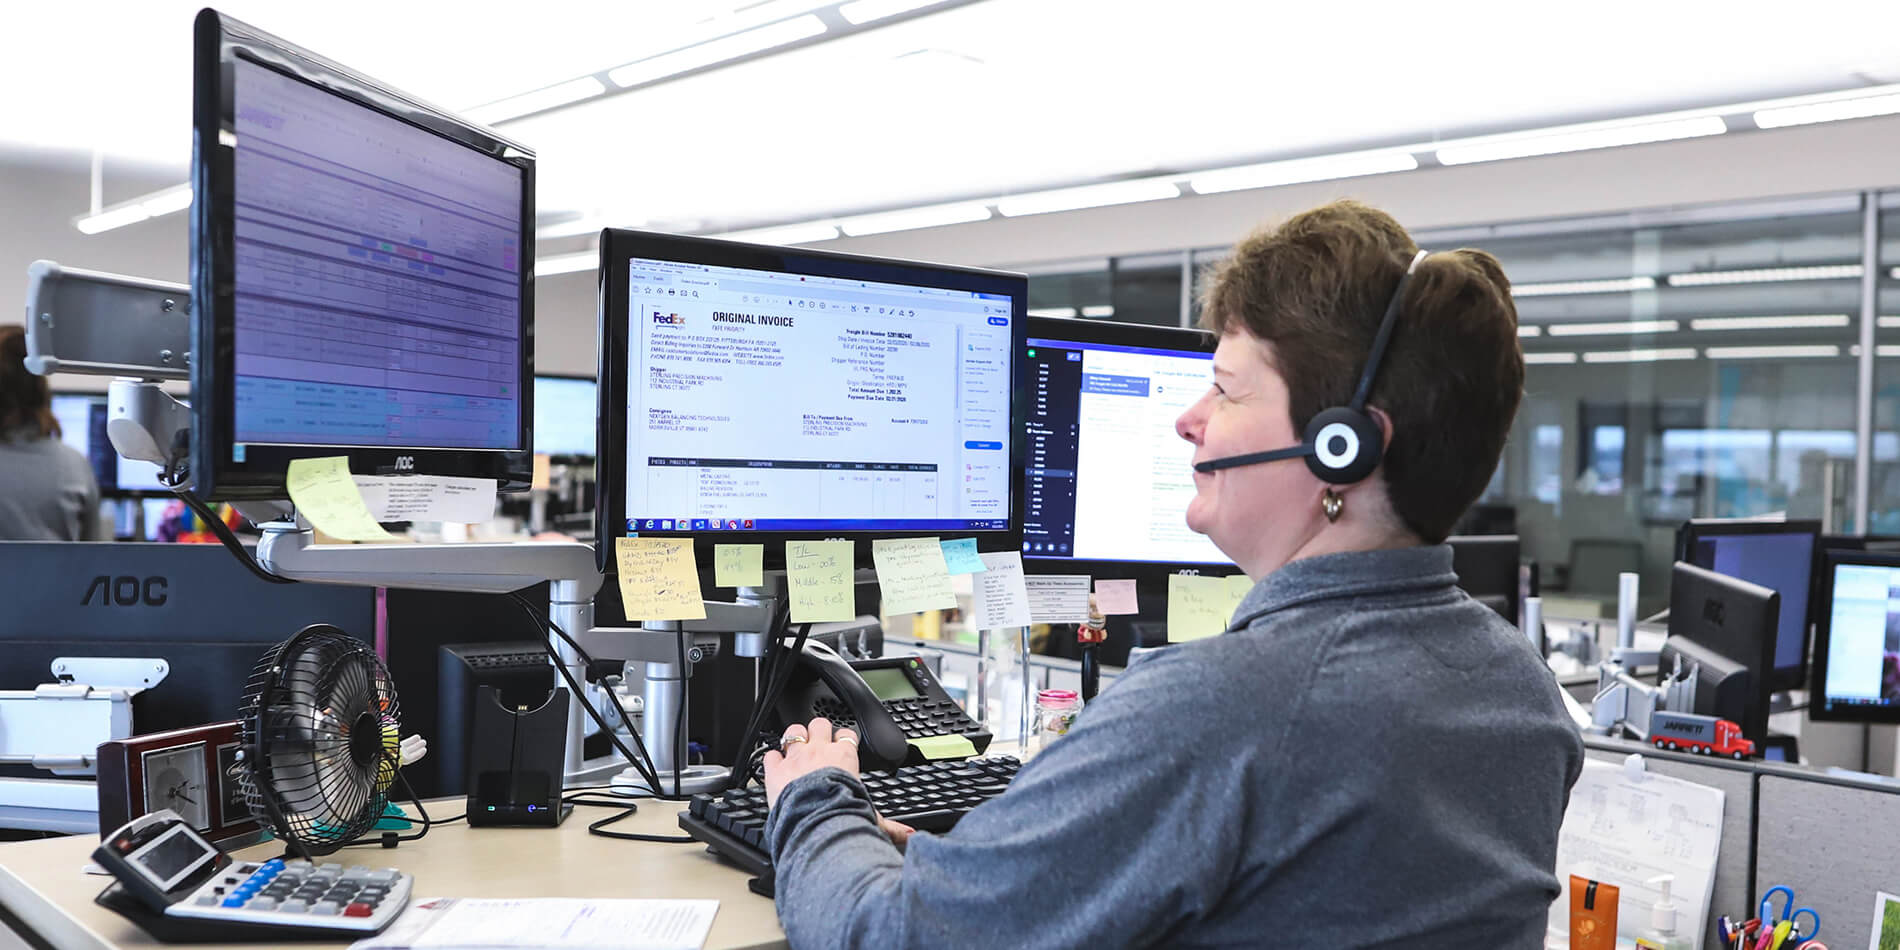 Jarrett Routing Center employee viewing computer screens while talking on a headset.